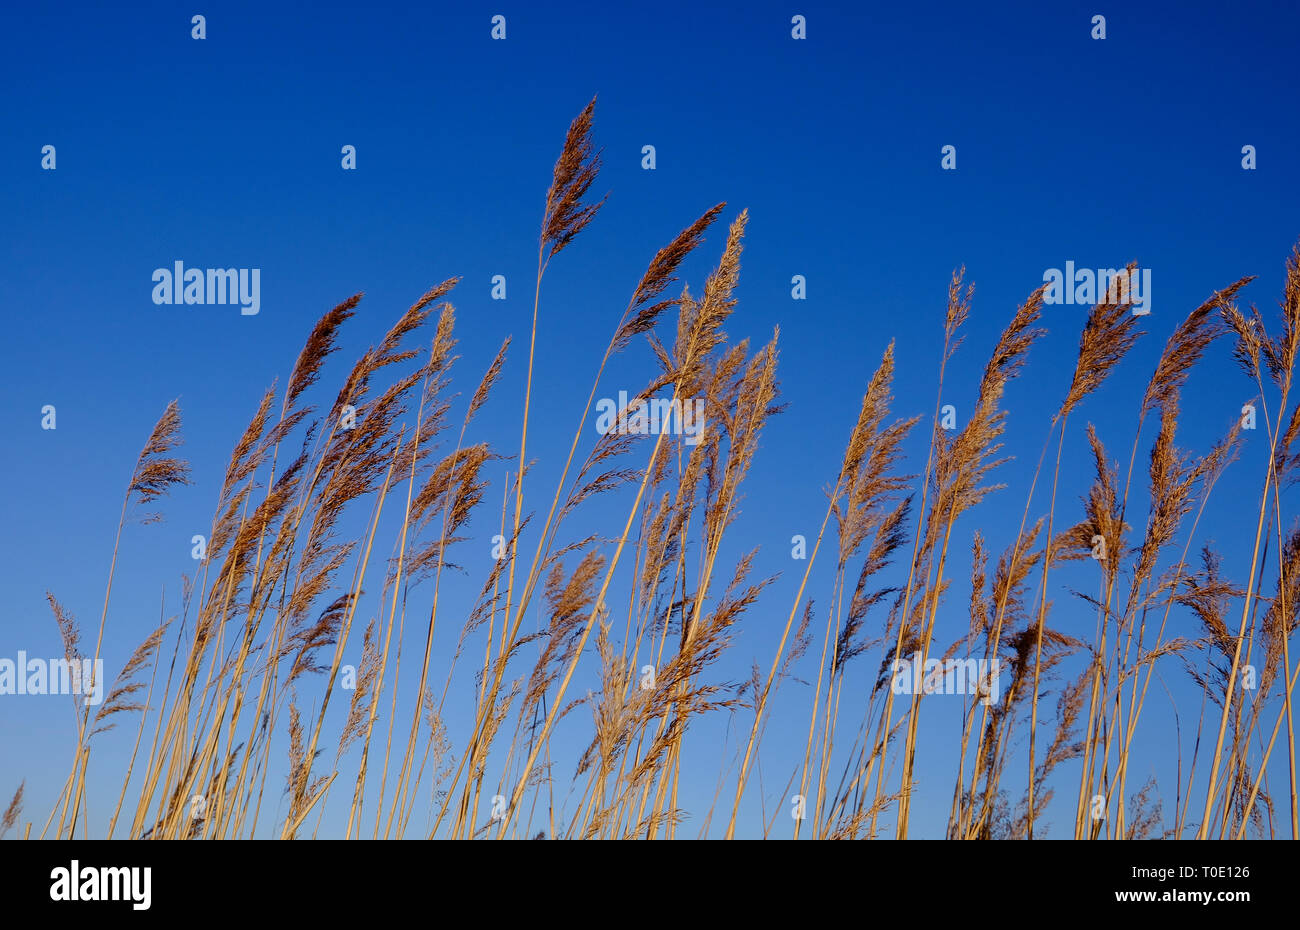 reeds on bright blue sky background Stock Photo